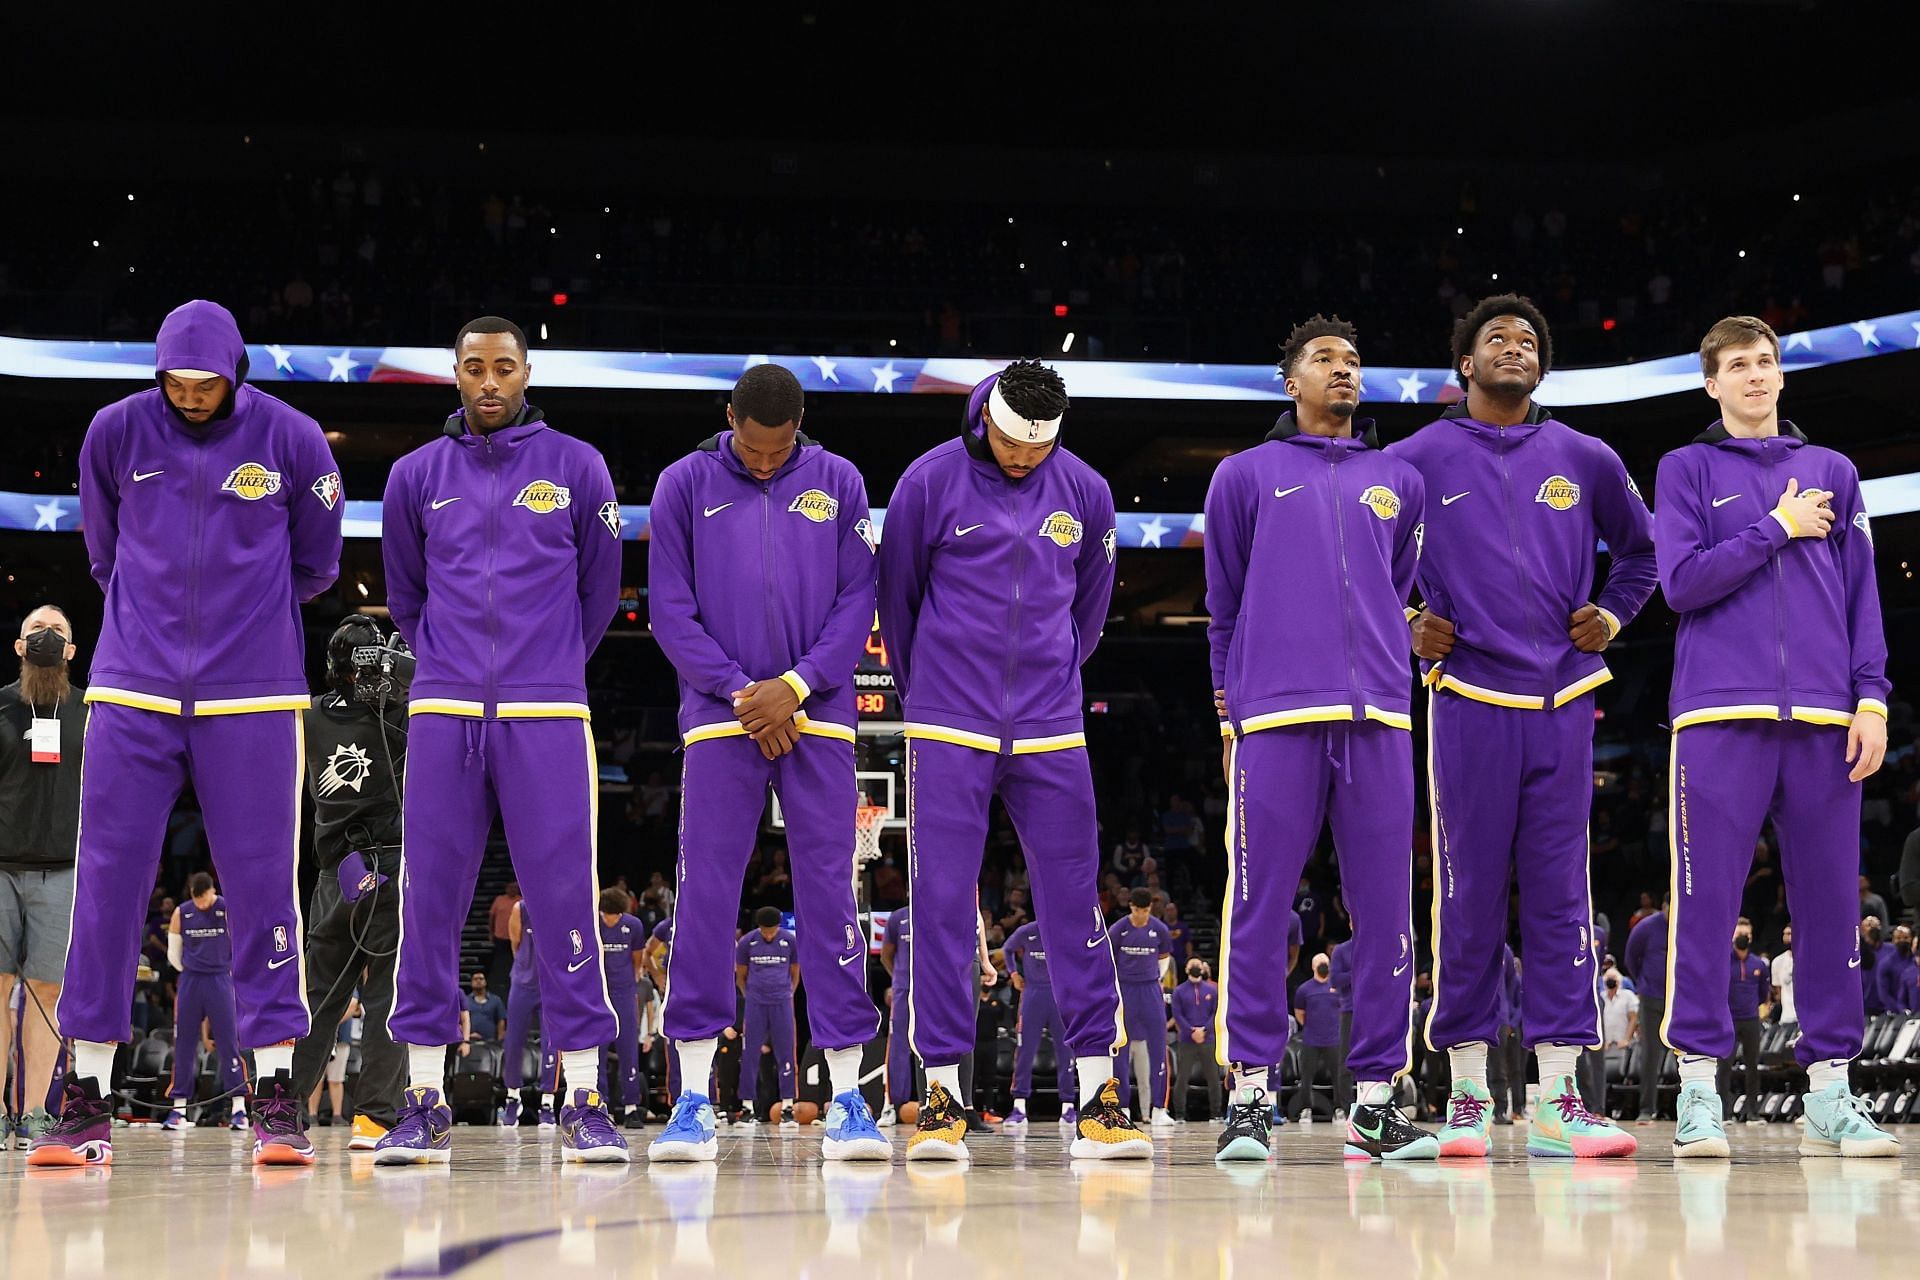 The LA Lakers&#039; season could spiral out of control if they continue to play without effort and determination. [Photo: LeBron Wire - USA Today]